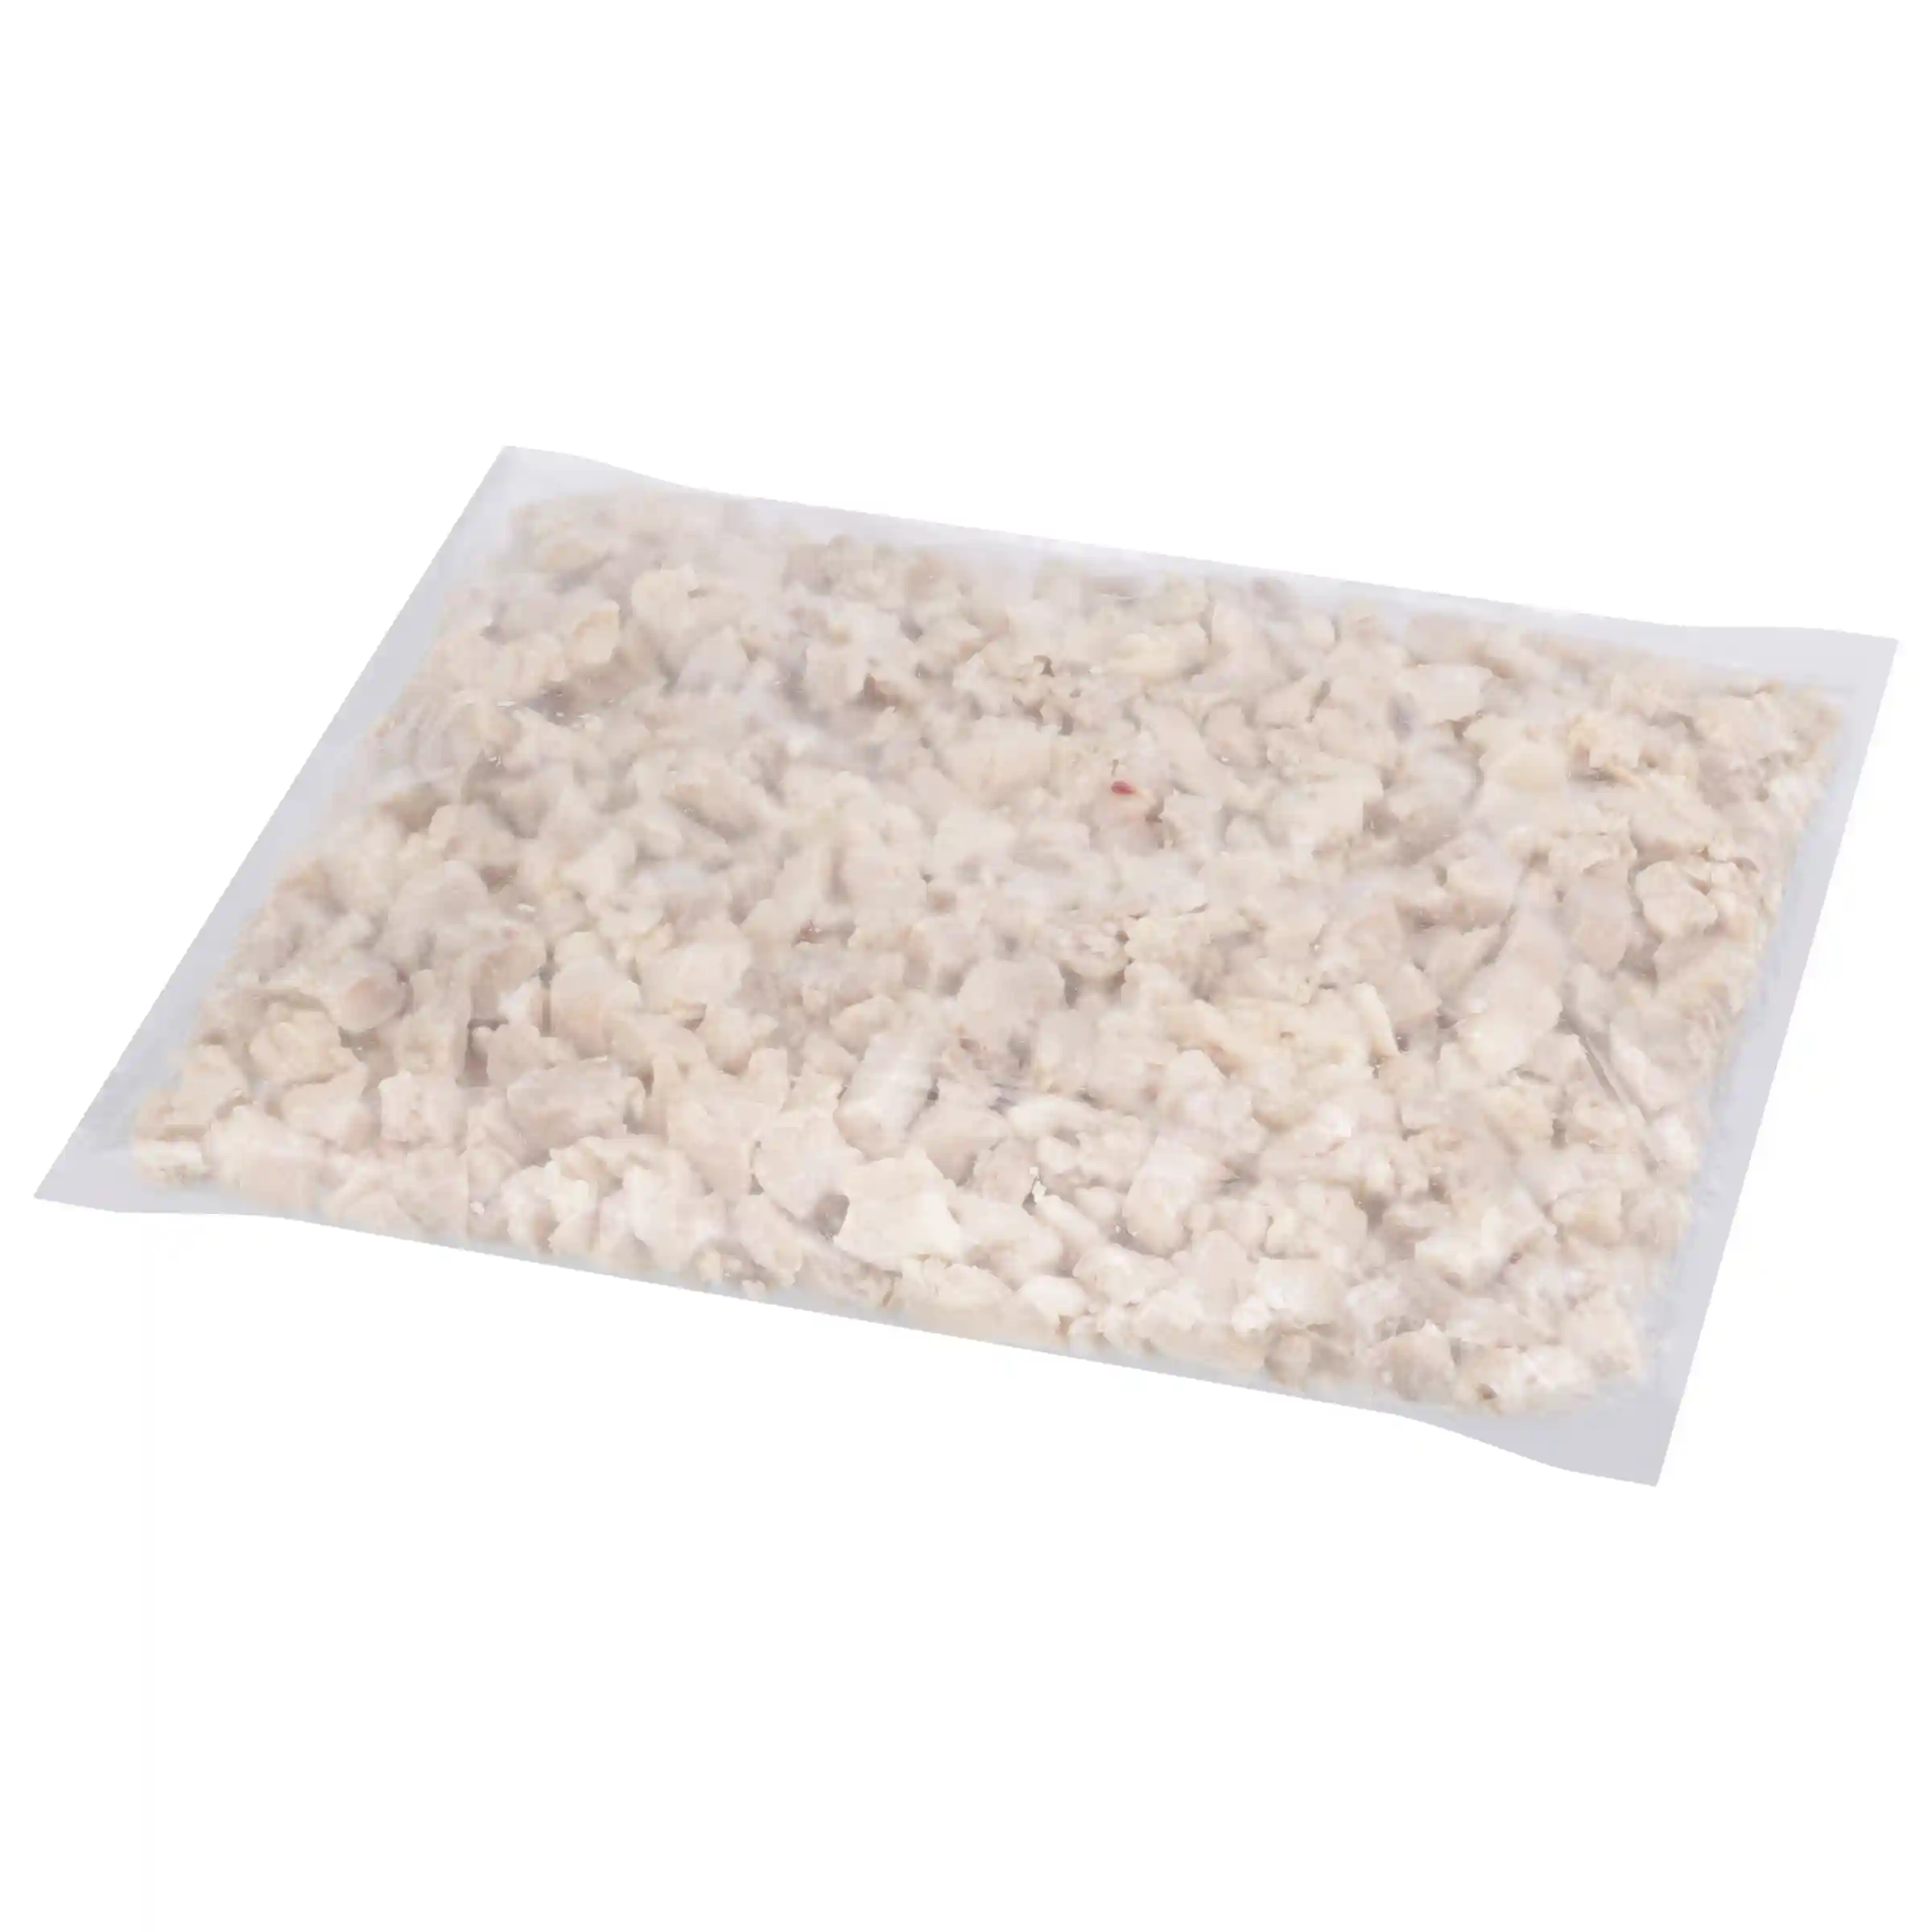 Tyson® Fully Cooked All Natural* Low Sodium Diced Chicken, Natural Proportion 60 White/40 Dark Meat, 0.5"_image_21